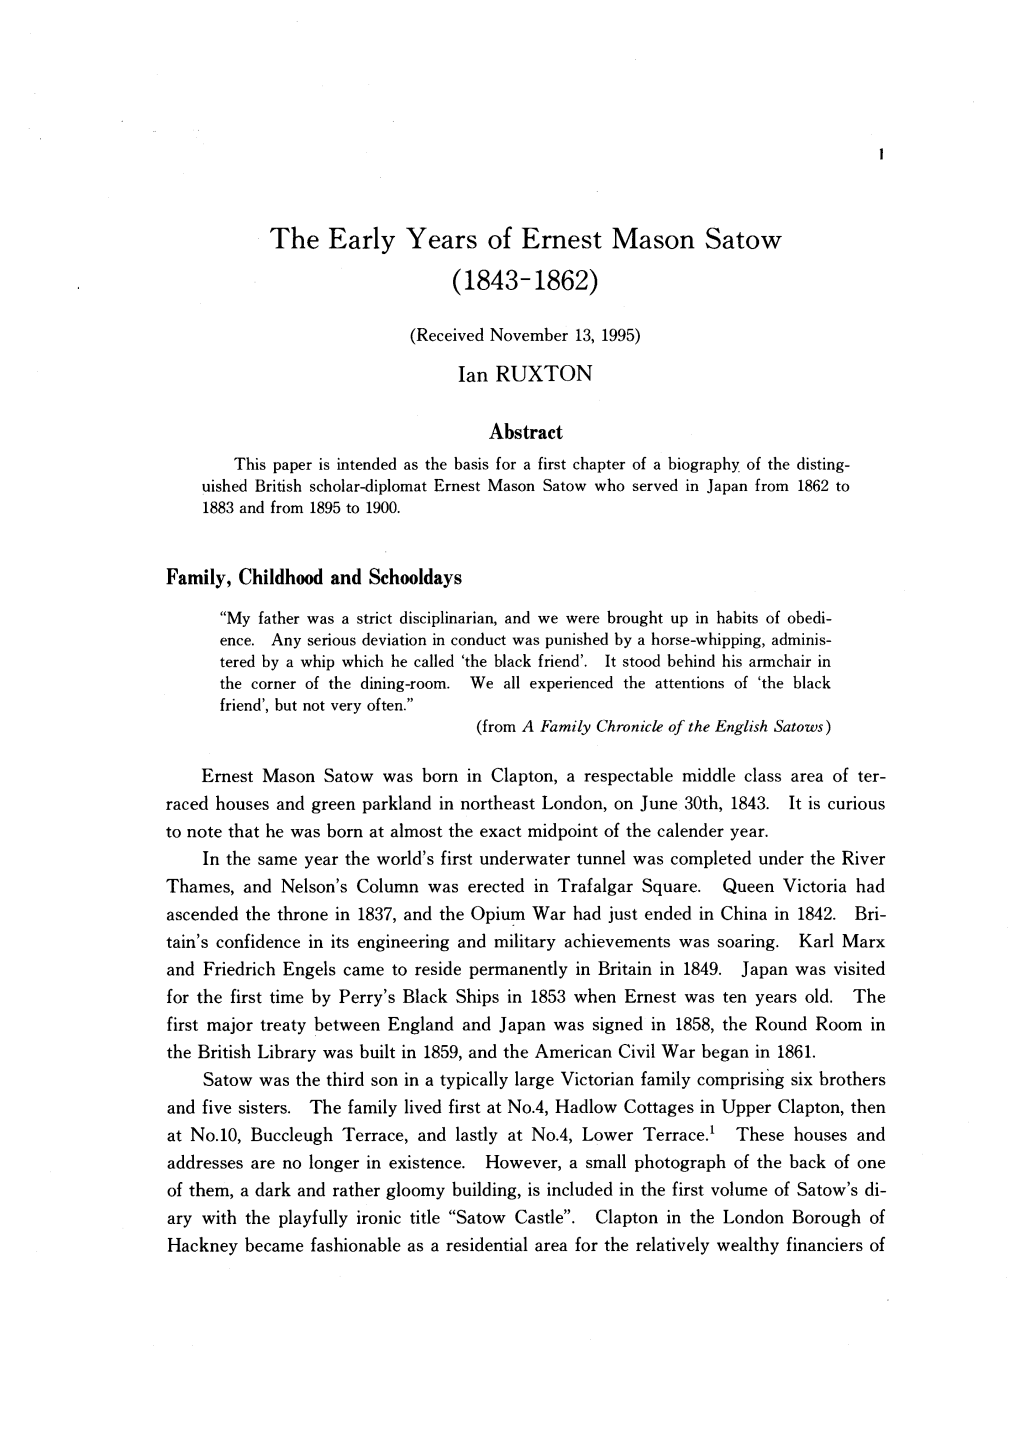 The Early Years of Ernest Mason Satow